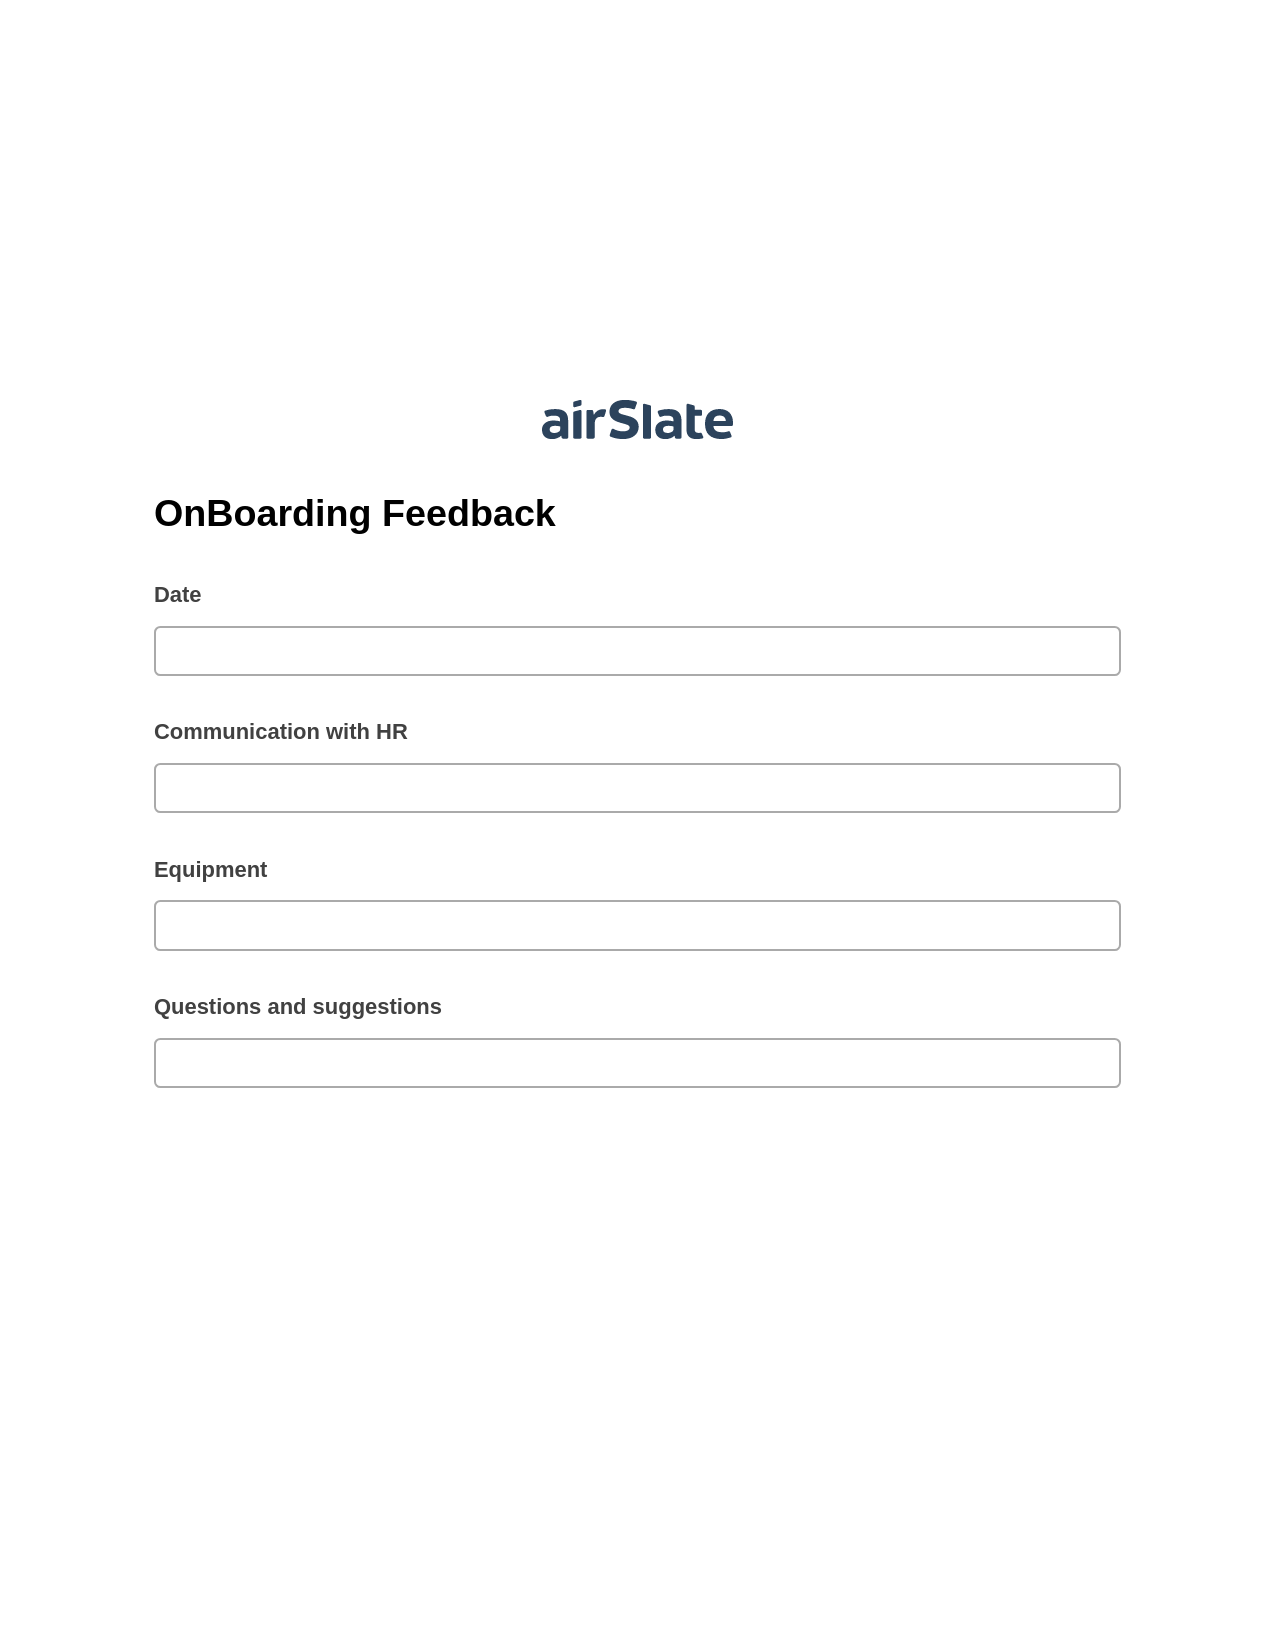 Multirole OnBoarding Feedback Pre-fill Slate from MS Dynamics 365 Records Bot, SendGrid send Campaign bot, Post-finish Document Bot